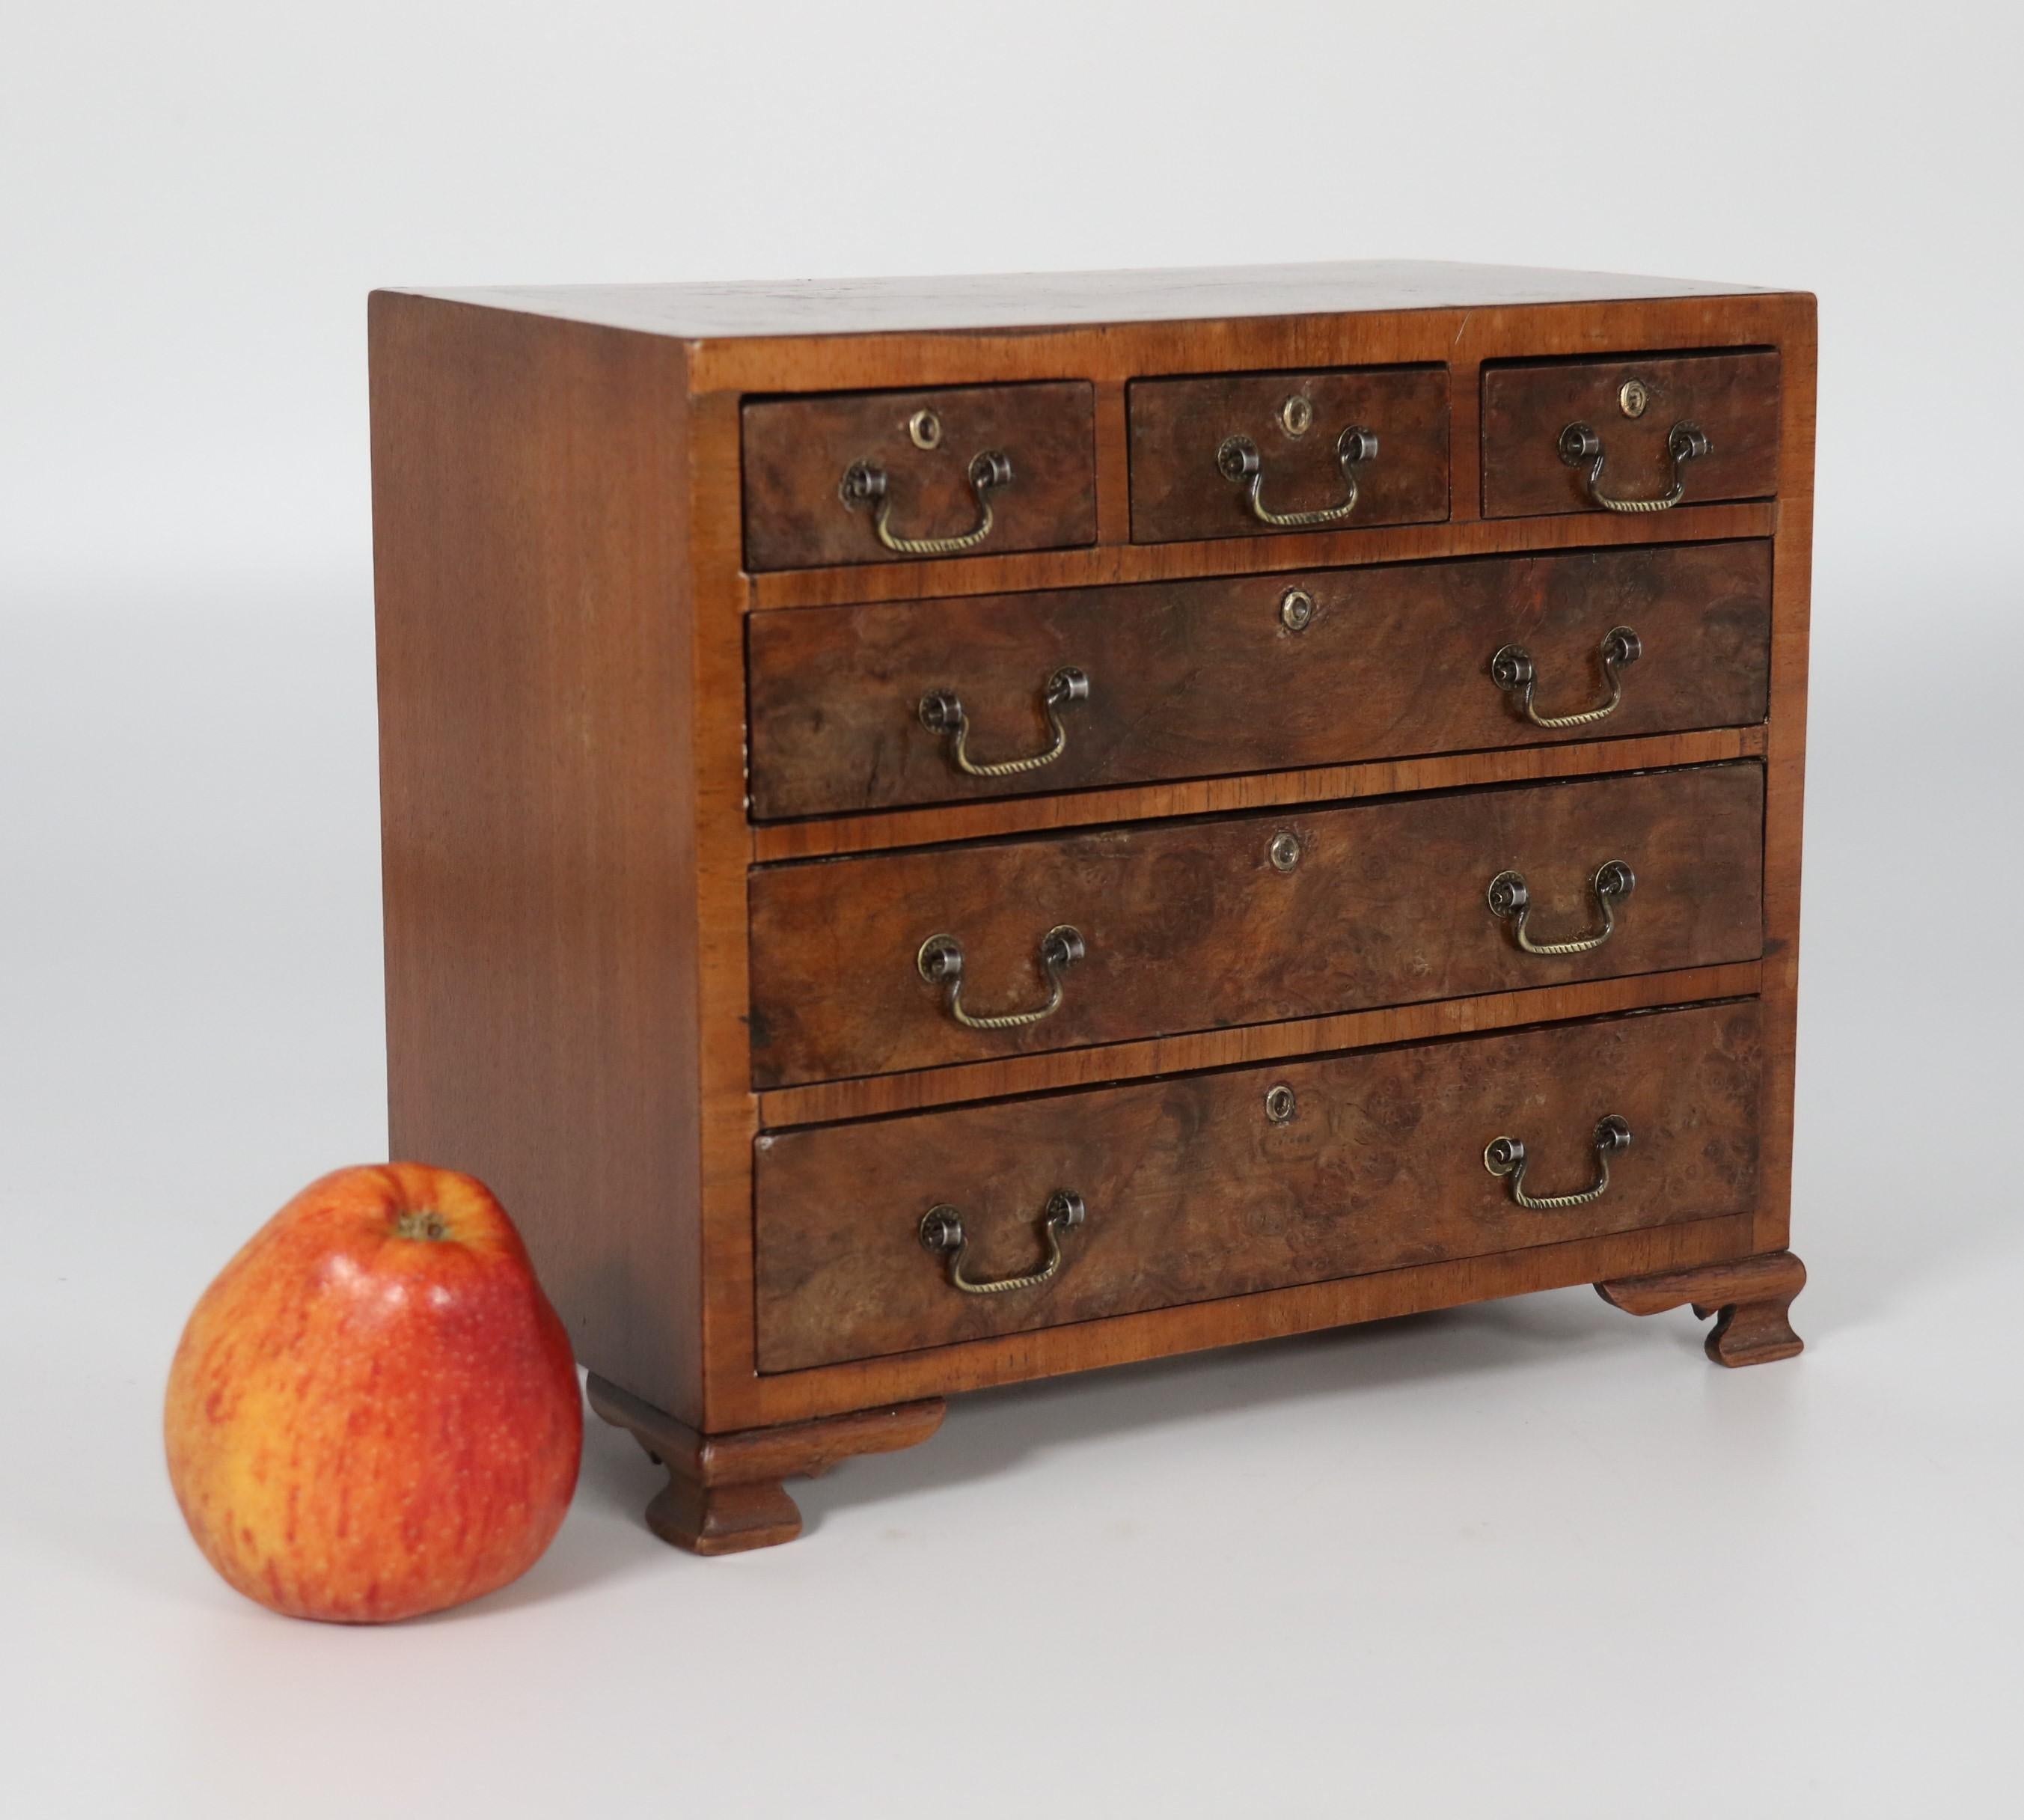 British A miniature George II style figured walnut chest of drawers, English circa 1900 For Sale